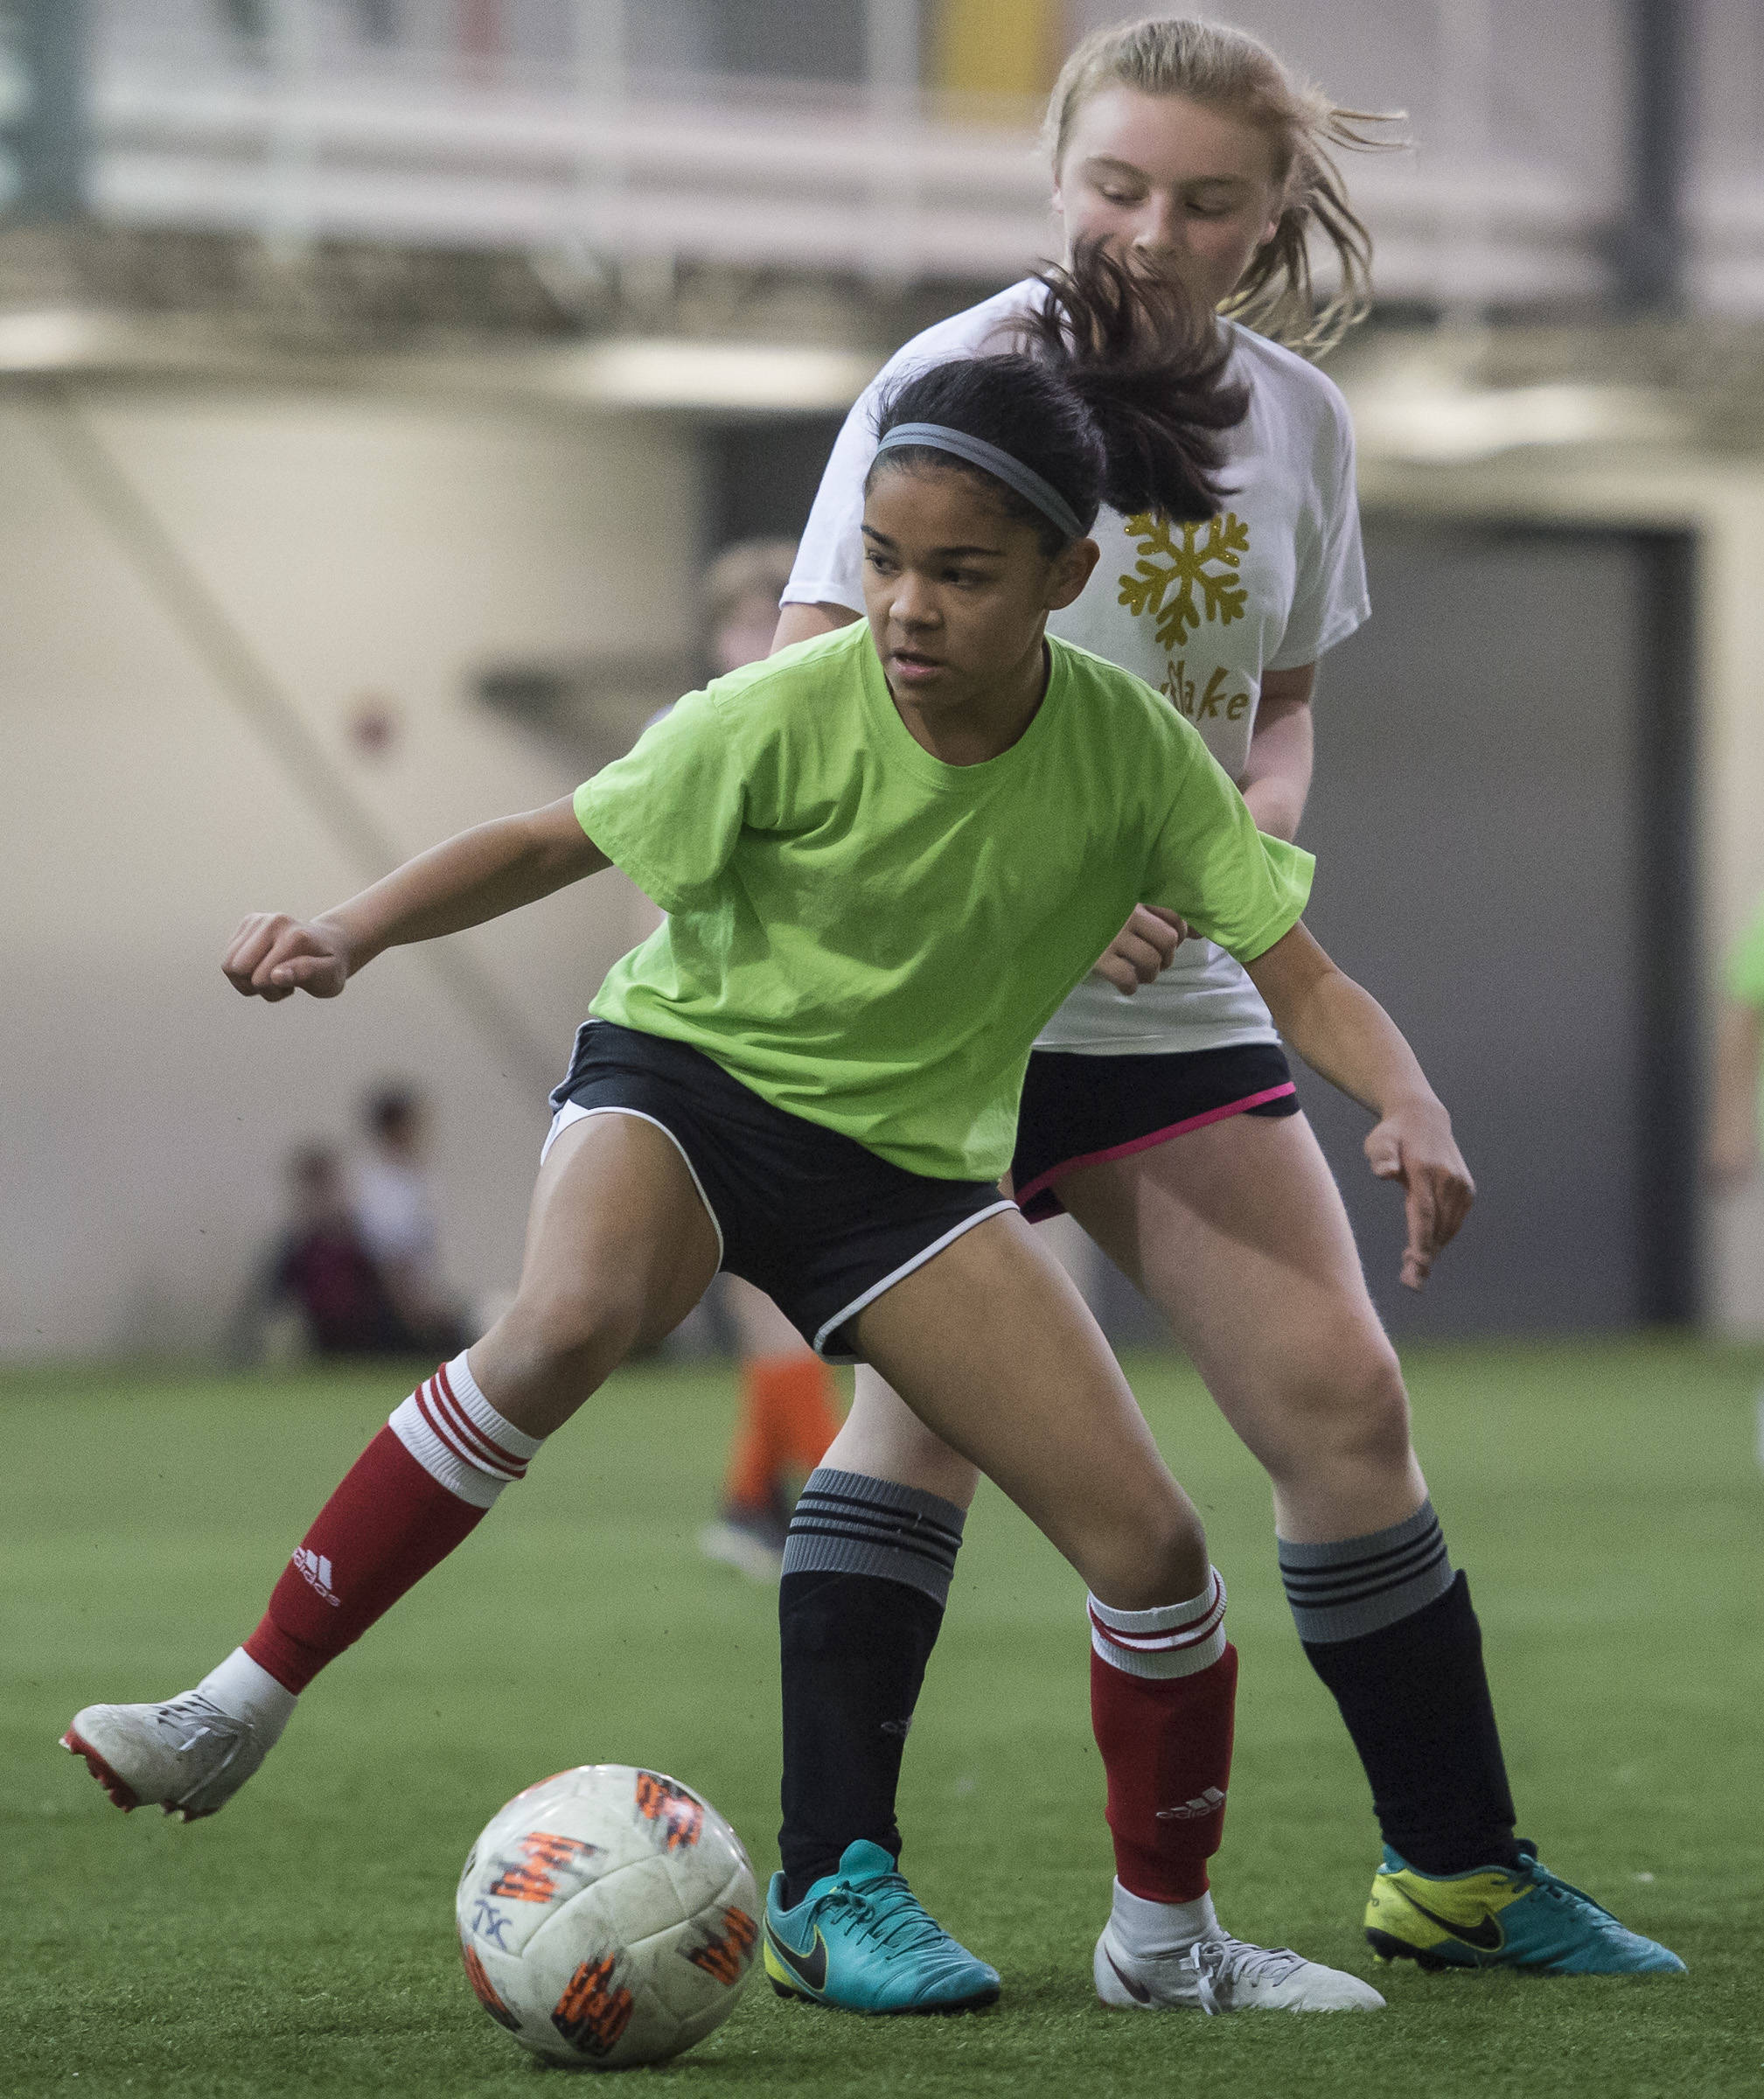 Missile Toes’ Cadence Plummer controls the ball against Snowflake United’s Isabelle Powers at the annual Holiday Cup Soccer Tournament at the Wells Fargo Dimond Park Field House on Wednesday, Dec. 26, 2018. (Michael Penn | Juneau Empire)